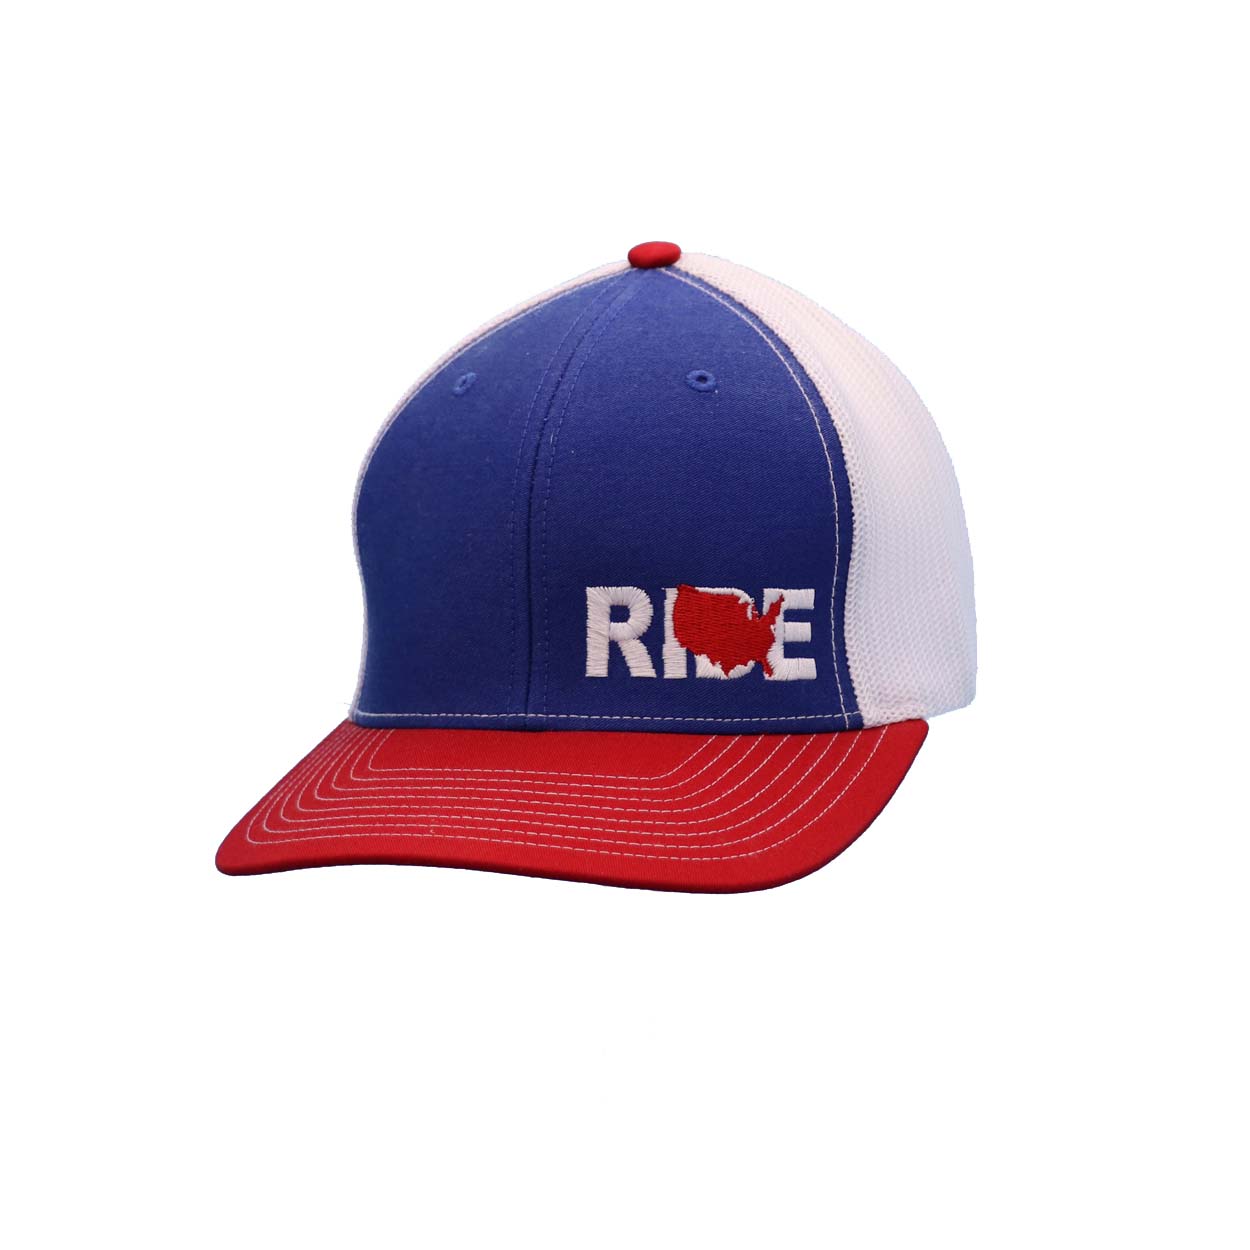 Ride United States Classic Pro Night Out Embroidered Snapback Trucker Hat Red/White/Blue